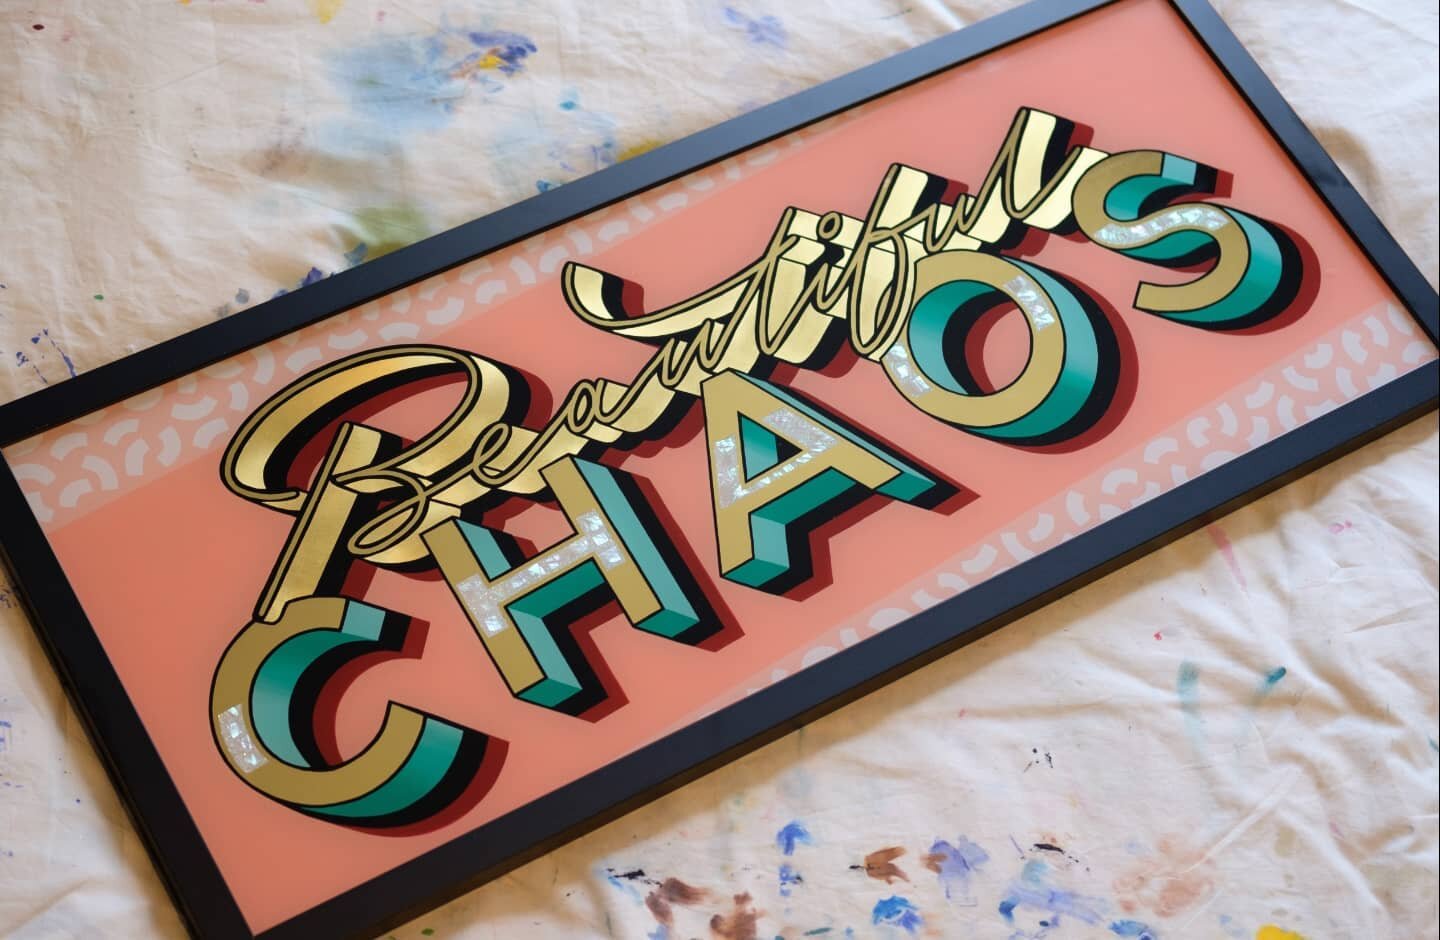 Another BEAUTIFUL CHAOS sign! Big one this time 👍 the full works of mirror gold, matte gold, mother of pearl, blending and patterns. You lucky people! 🔥 Thanks Joanna for commissioning this one 🌟

#signpainting #singwriter #signwriting #signpainte